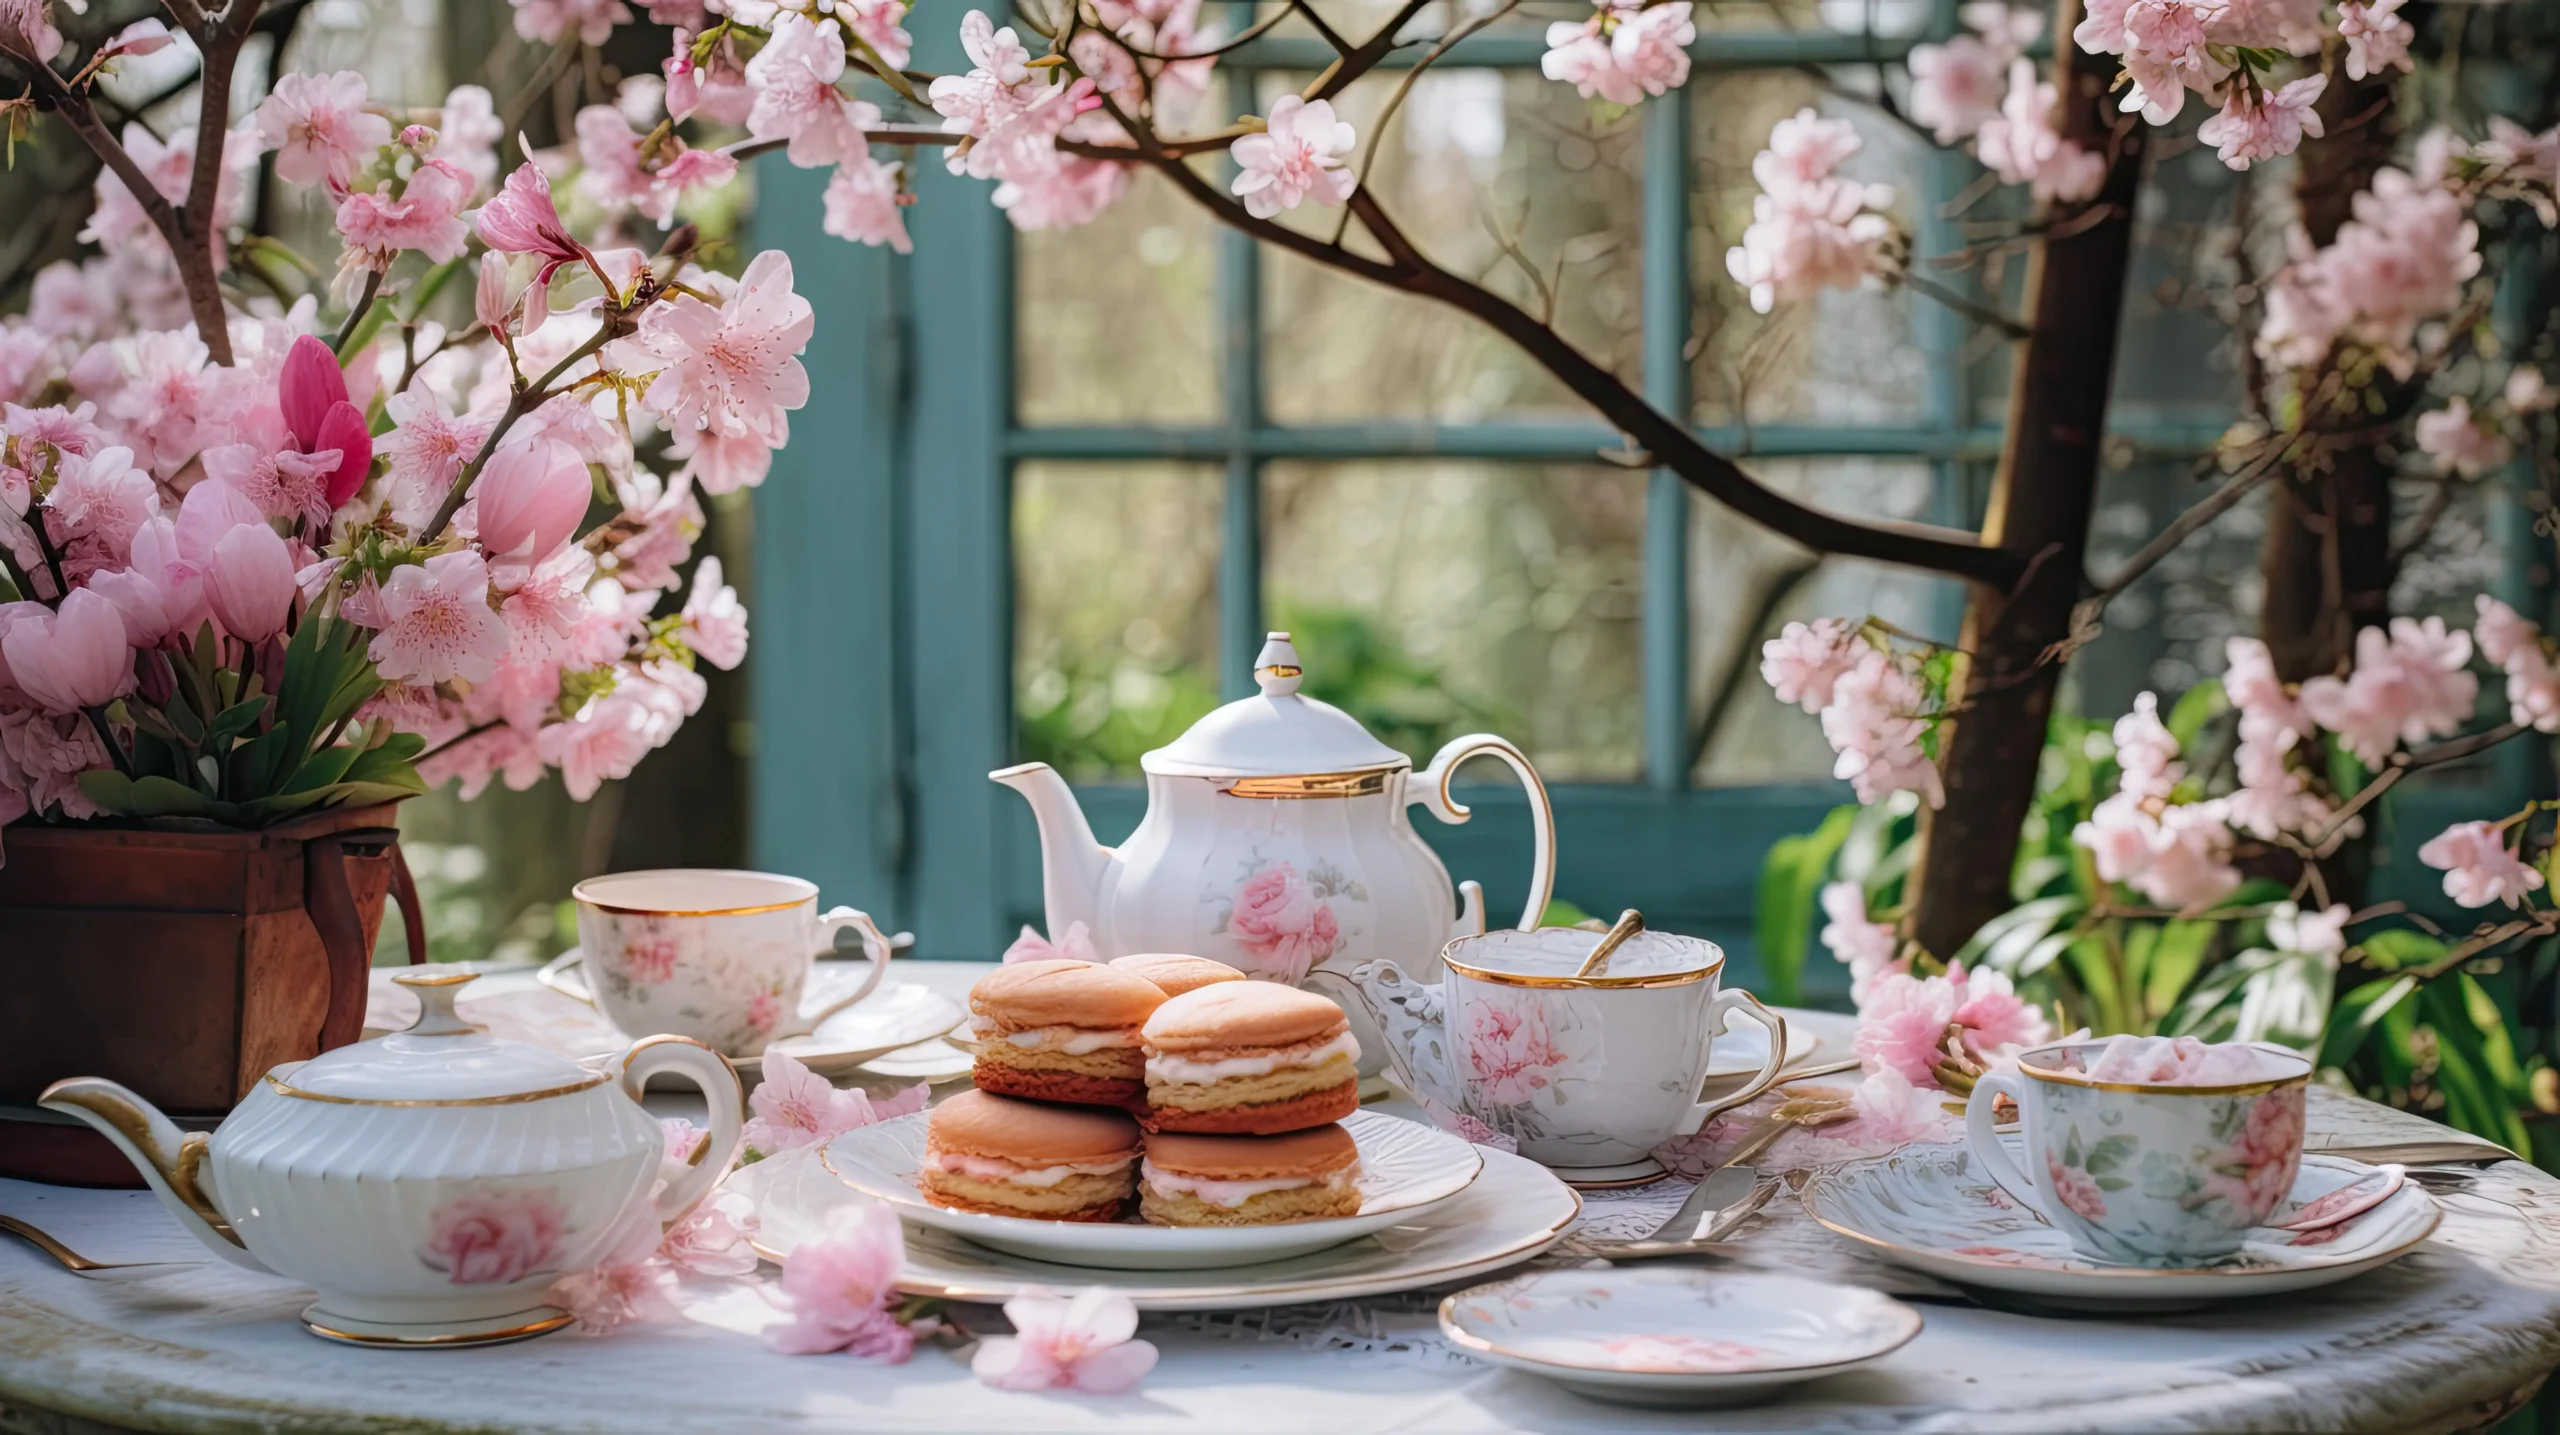 On a sunny day, a birthday party florist sets up an exquisite tea set on a table adorned with blooming pink flowers, showcasing a teapot, cups, and macarons in elegance.